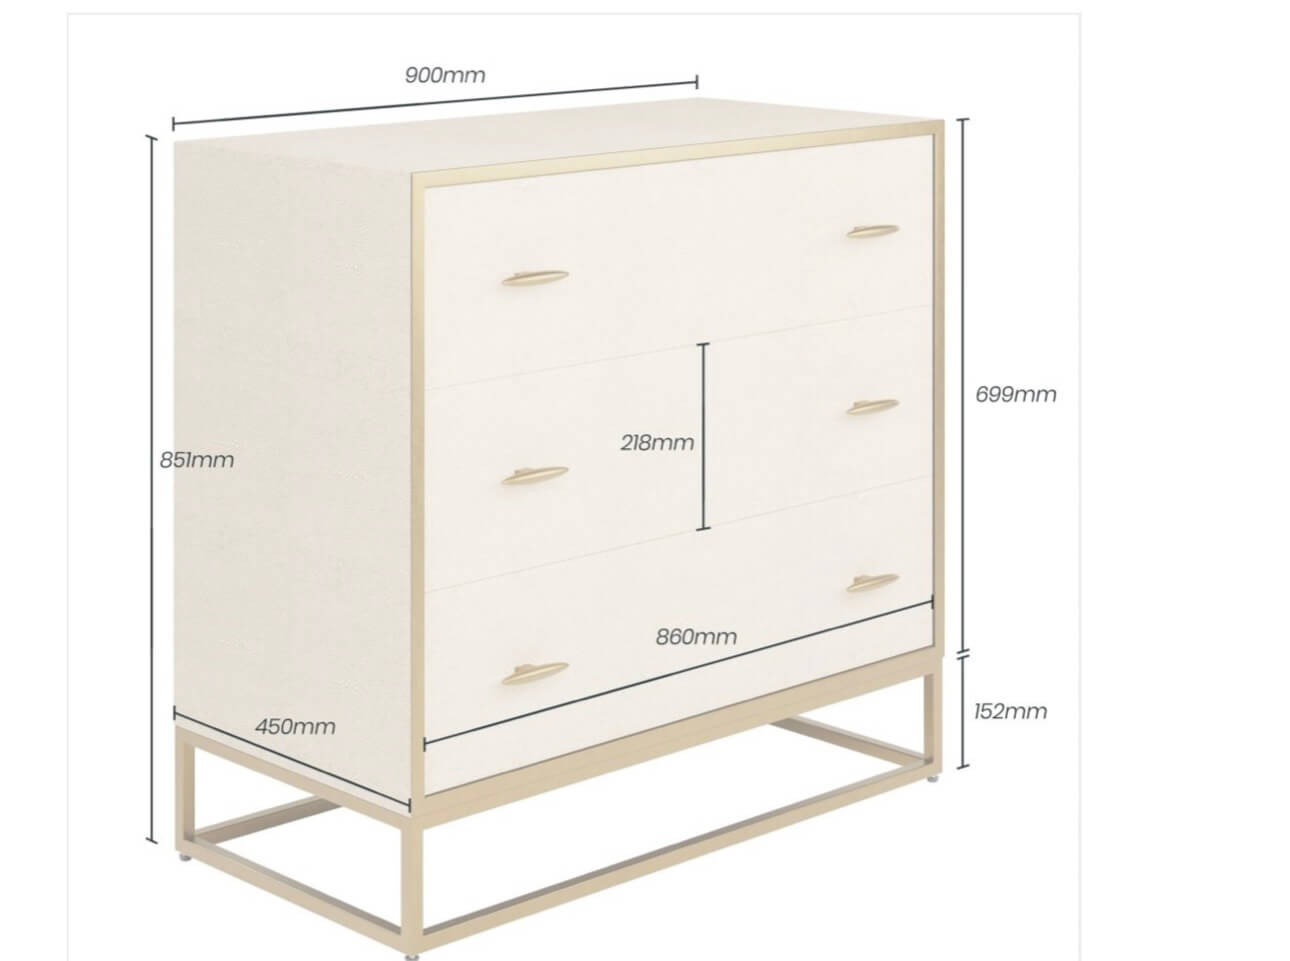 Ivory Shagreen Chest Of Drawers